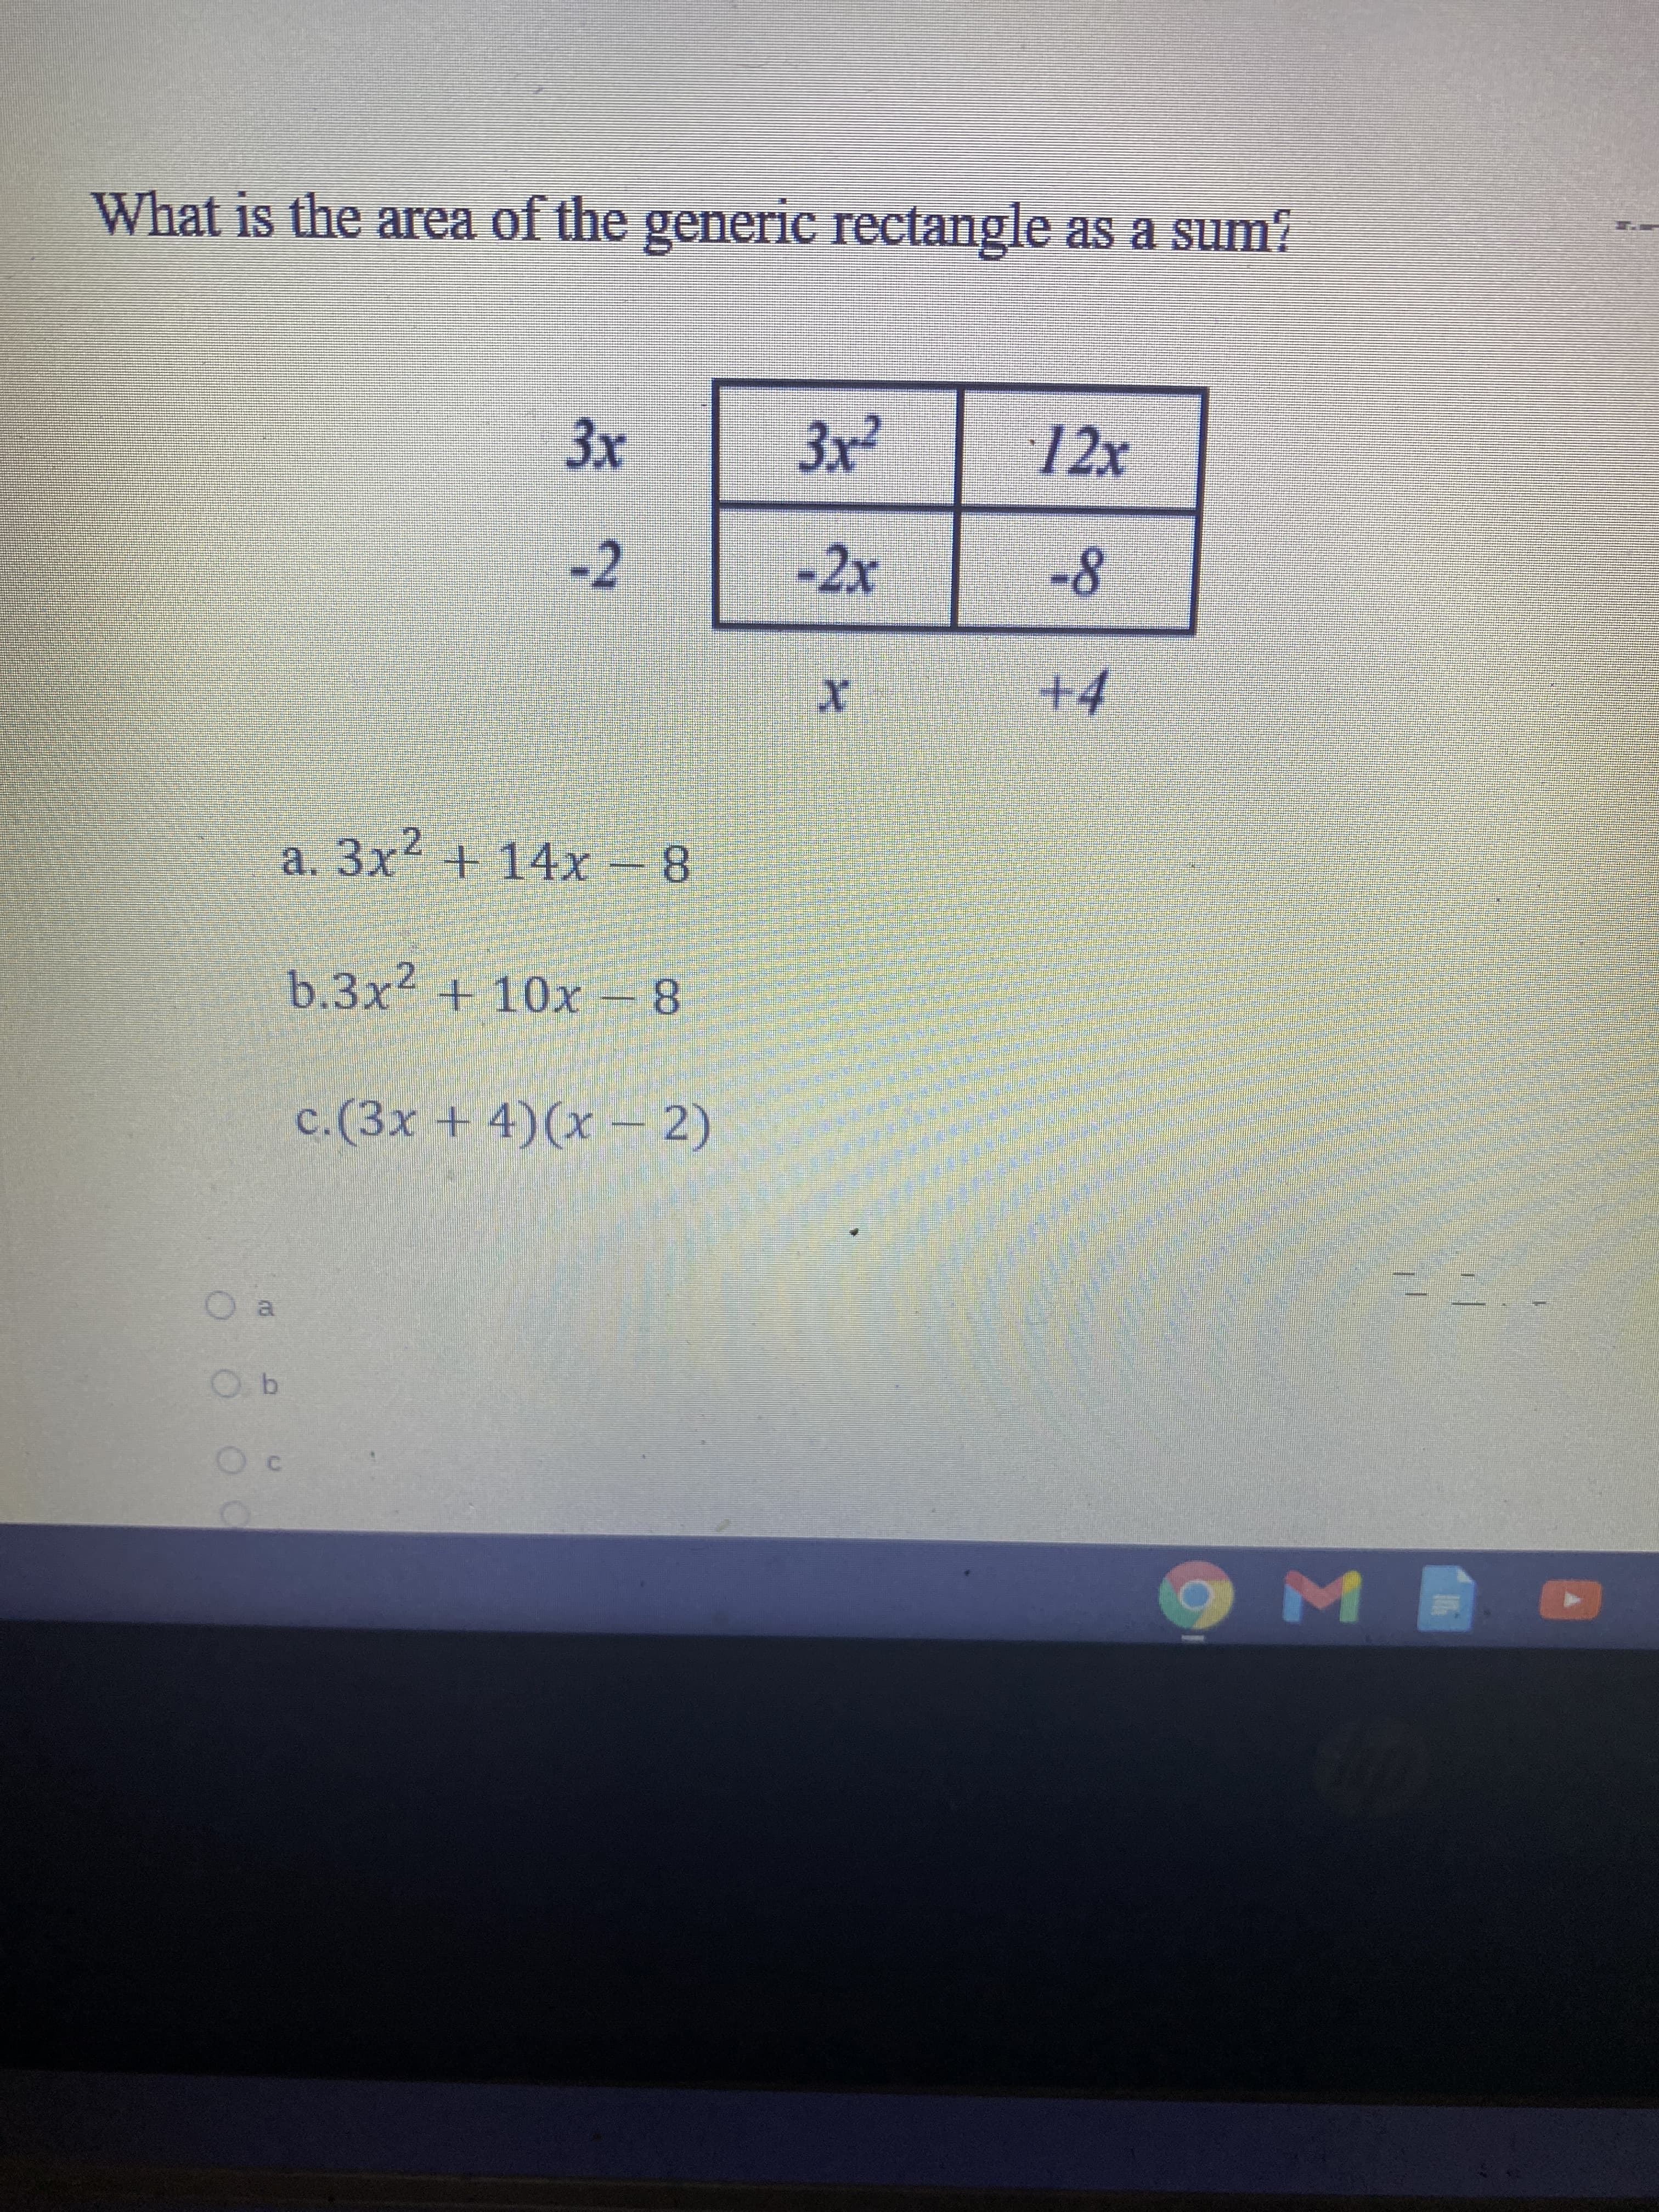 What is the area of the generic rectangle as a sum?
